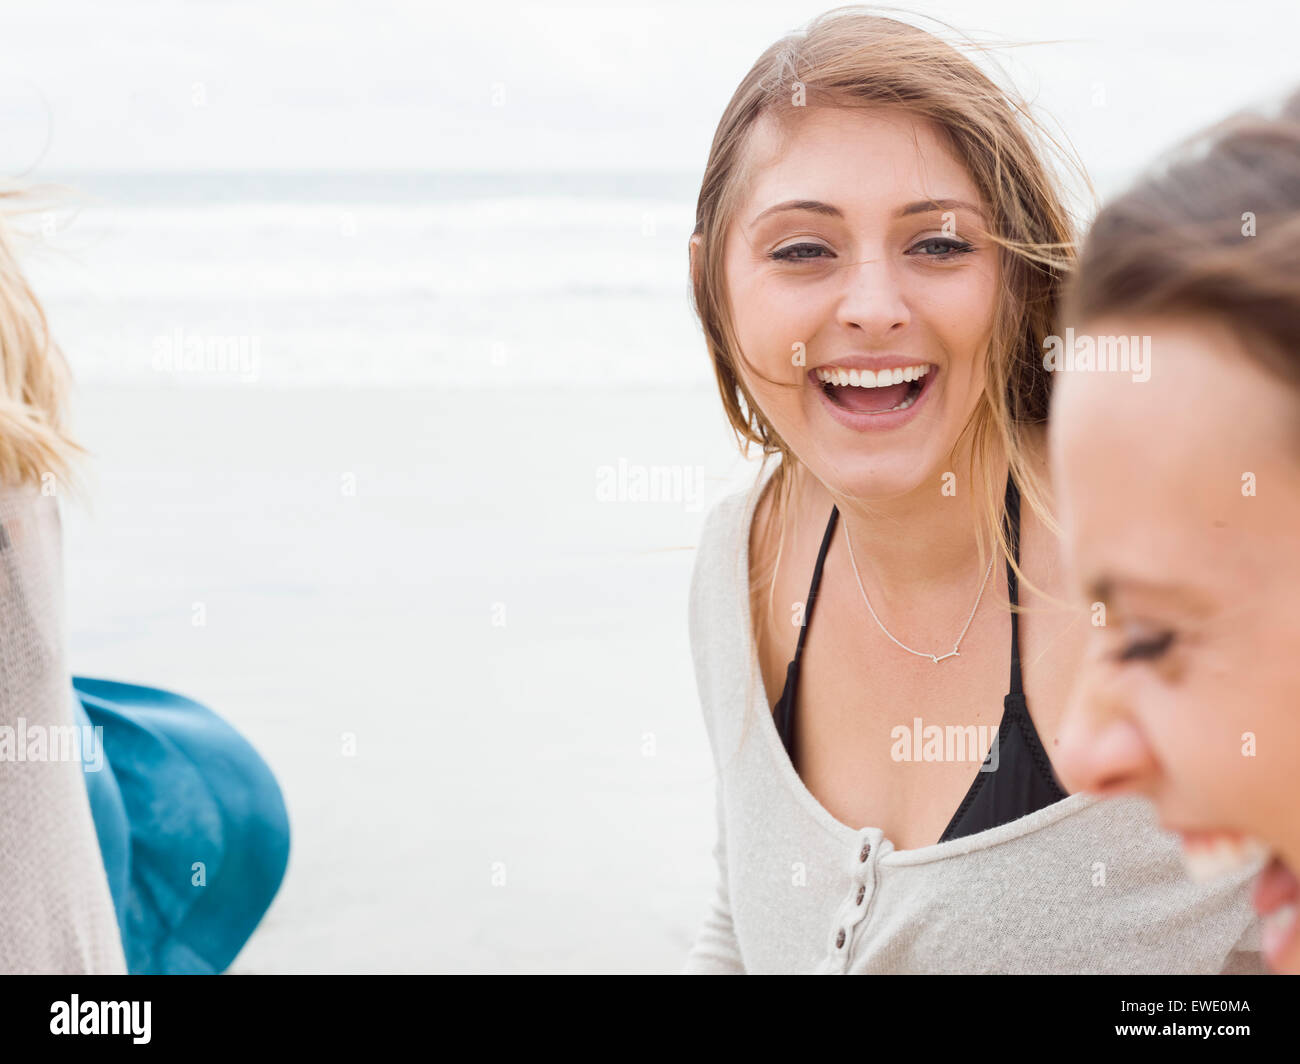 Two smiling young women walking on a beach Stock Photo